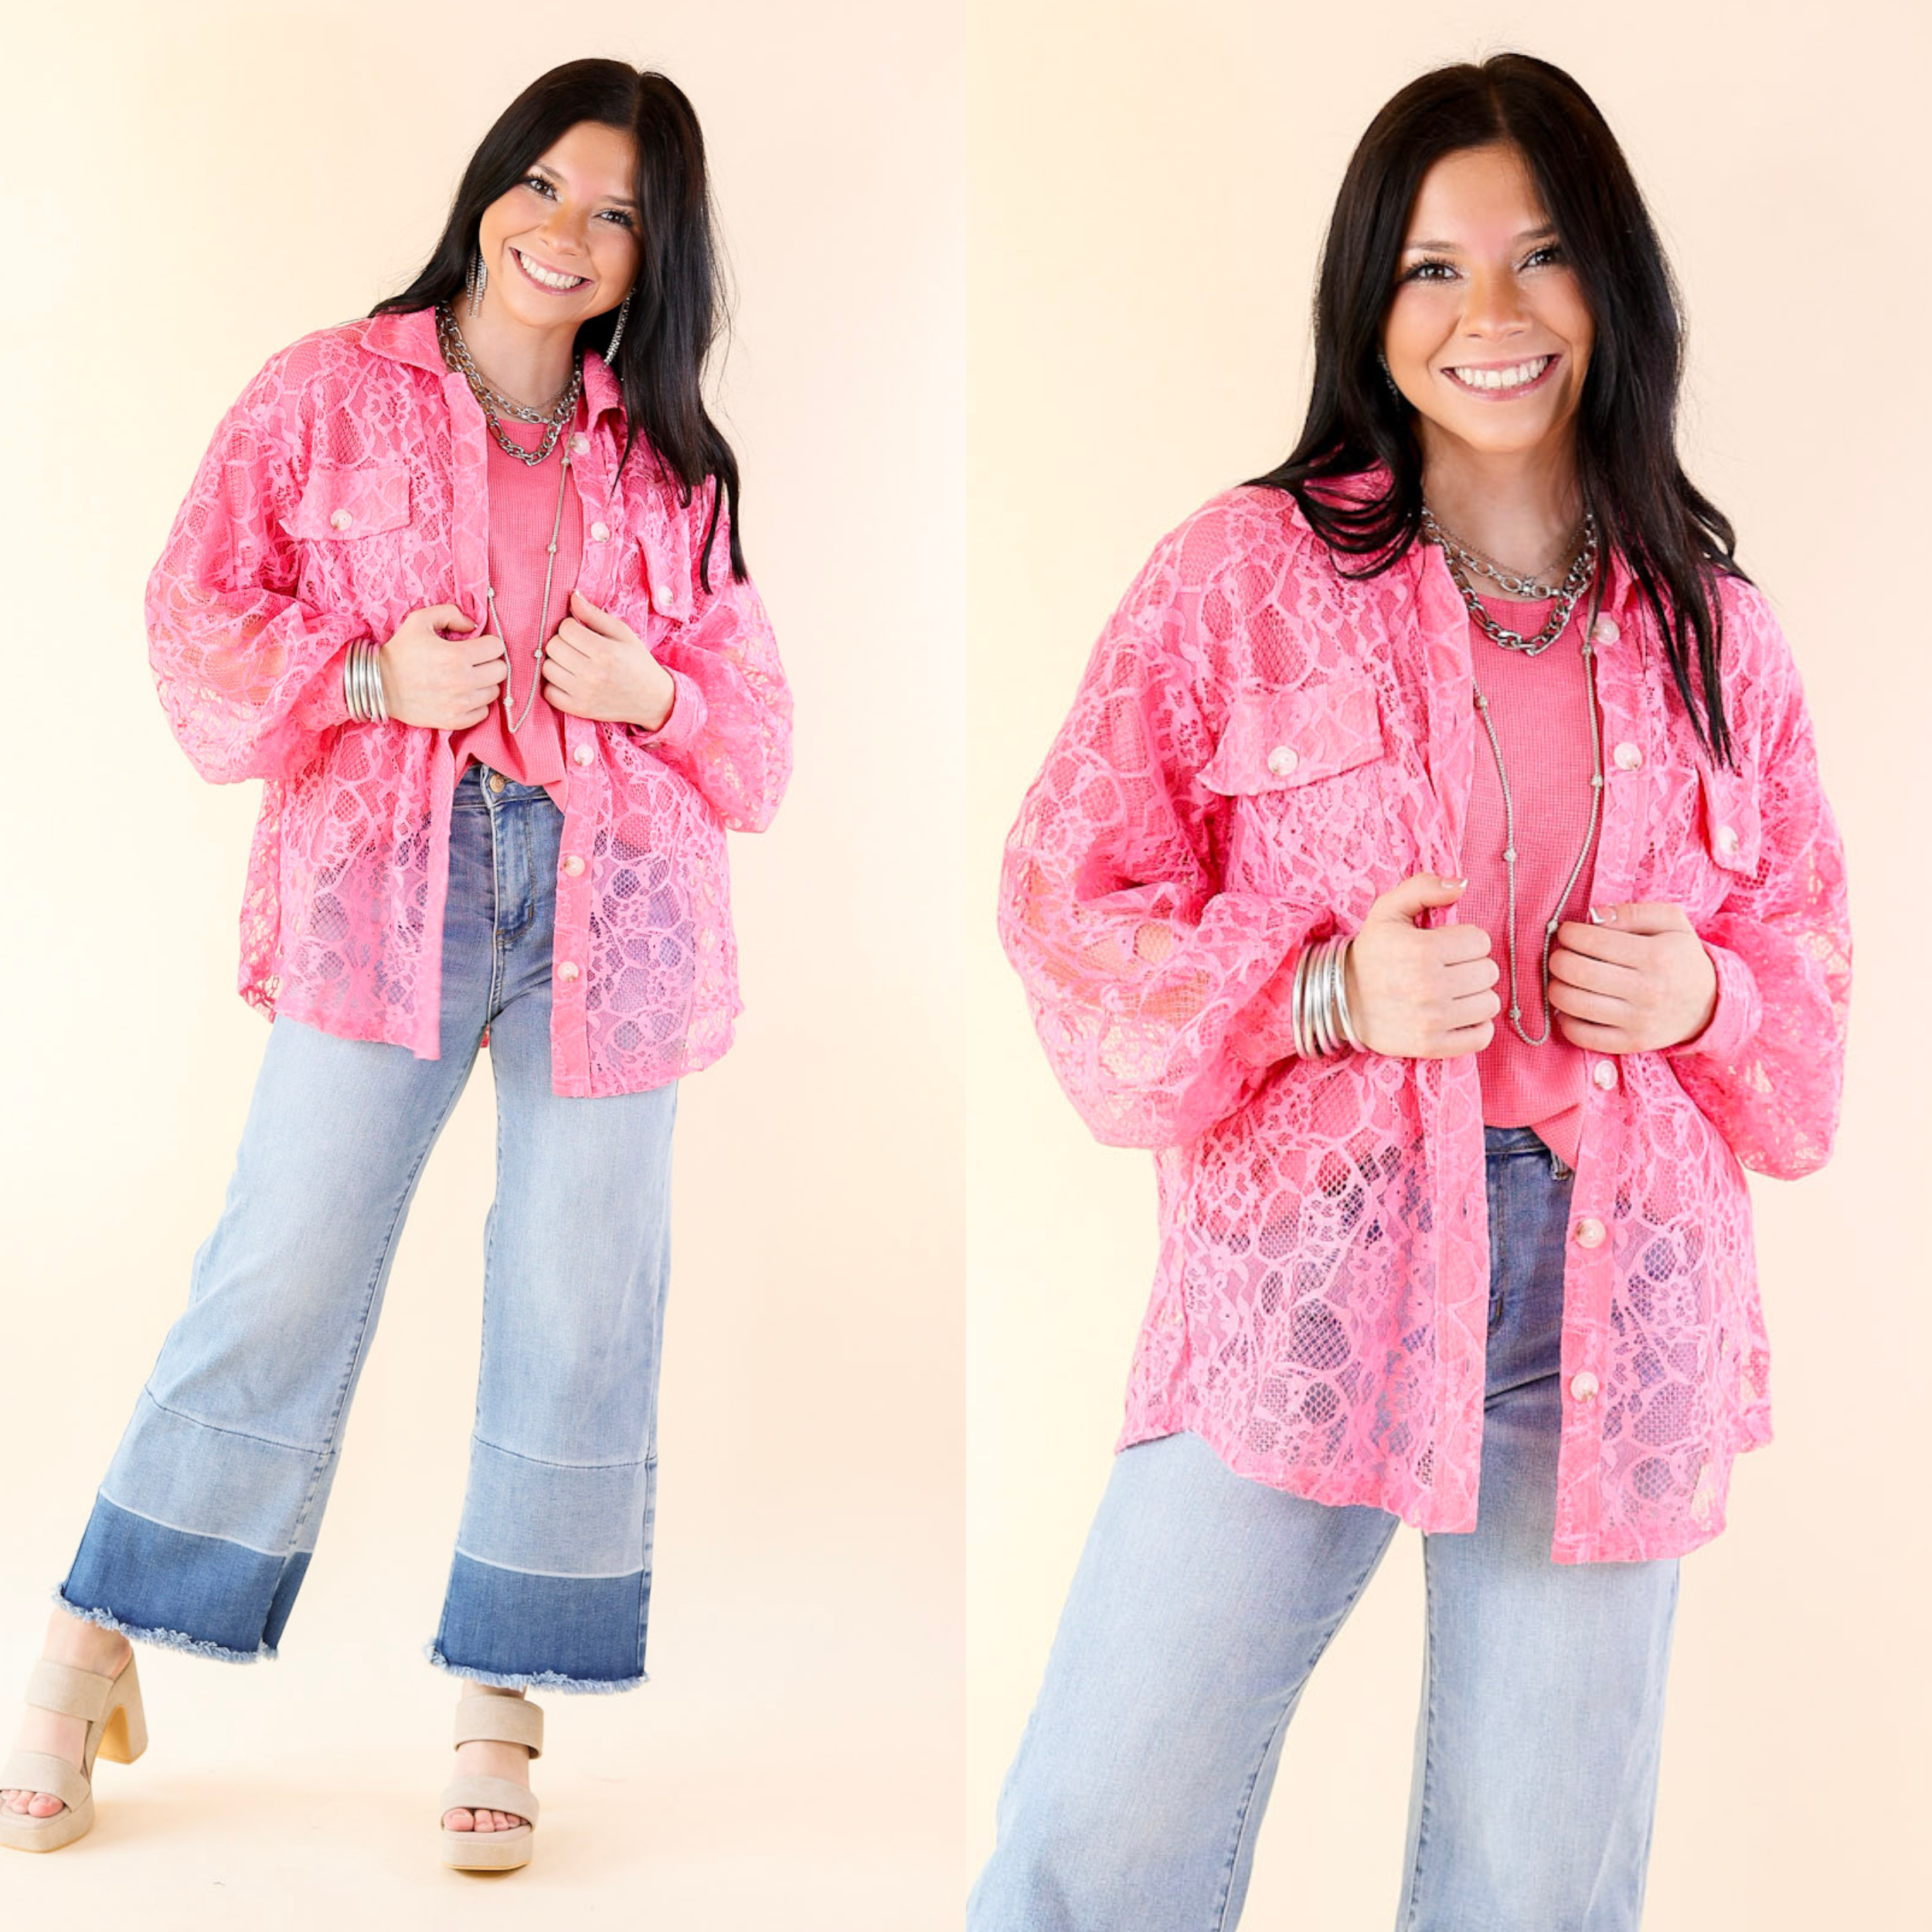 Sheer Chic Collared Button Up Lace Top in Pink Cosmos - Giddy Up Glamour Boutique